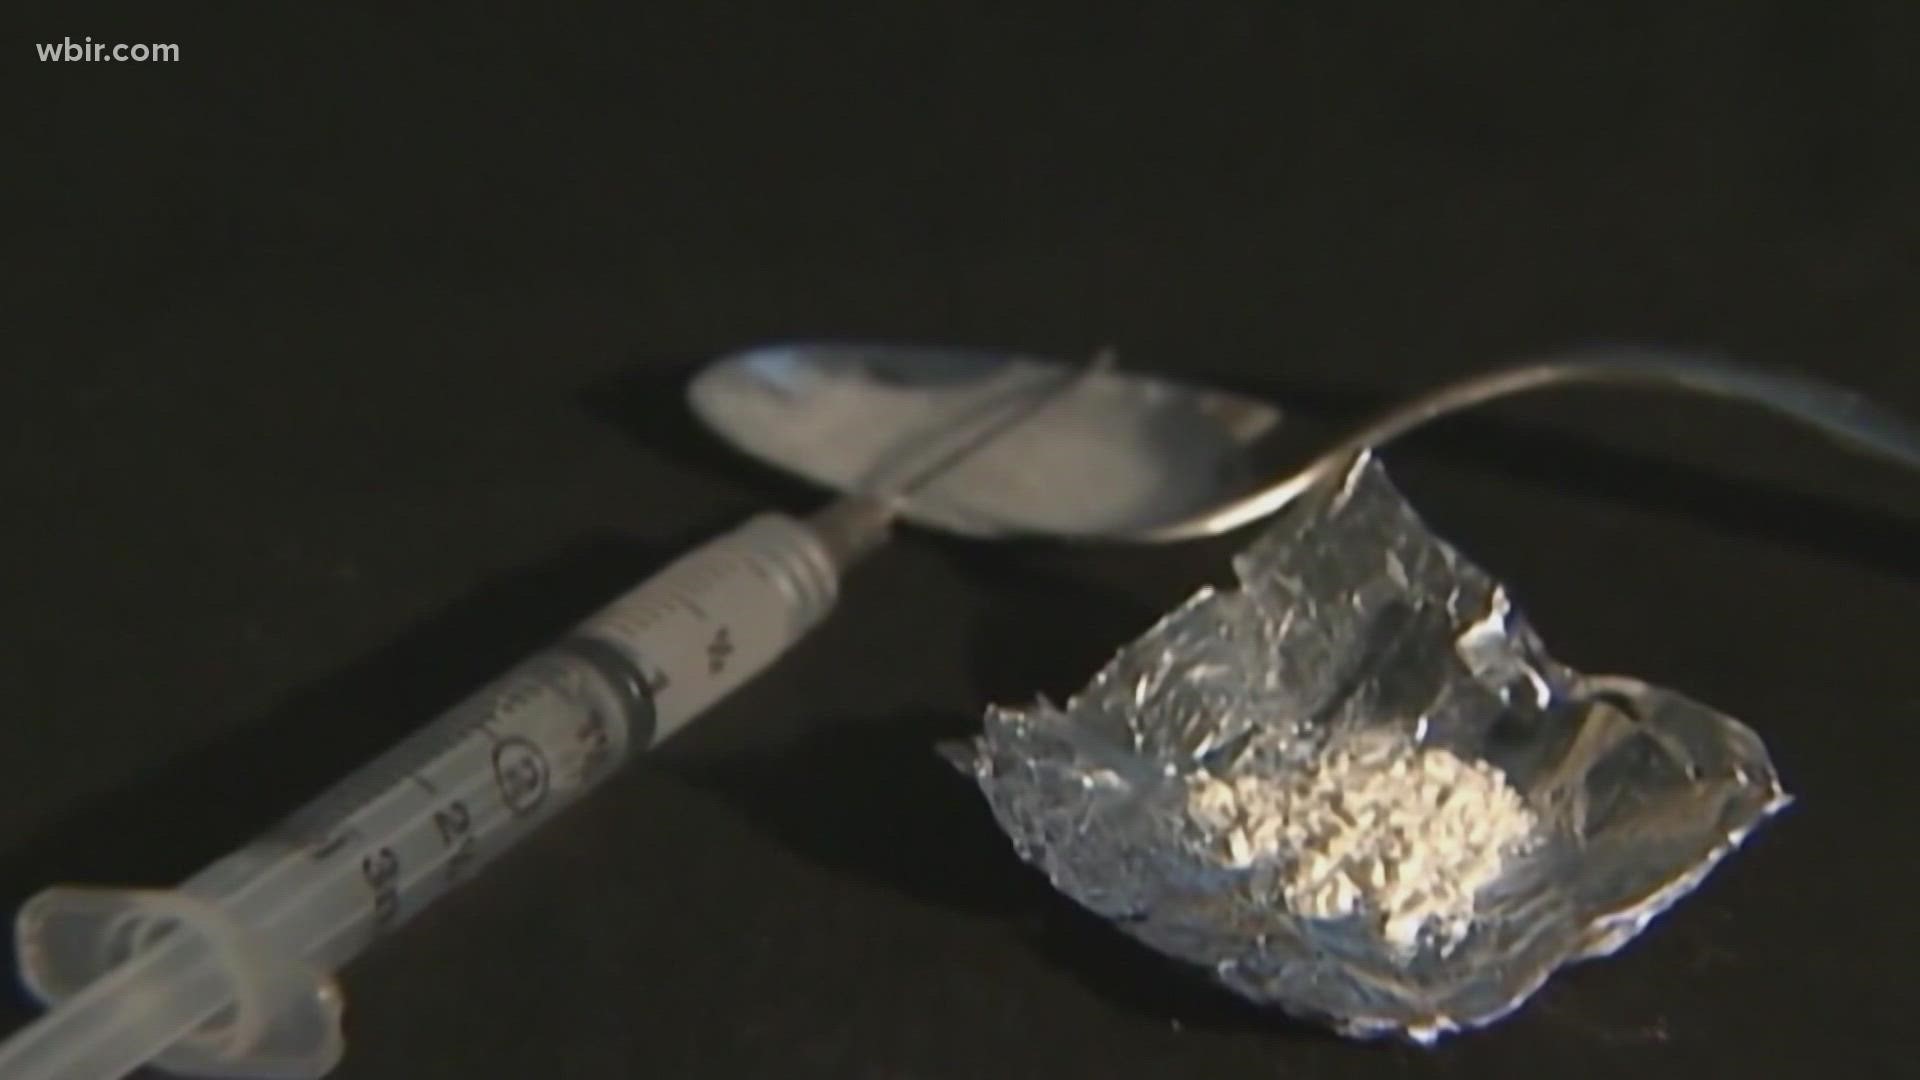 The District Attorney said 384 people have died of suspected drug overdoses, bearing last year's record.